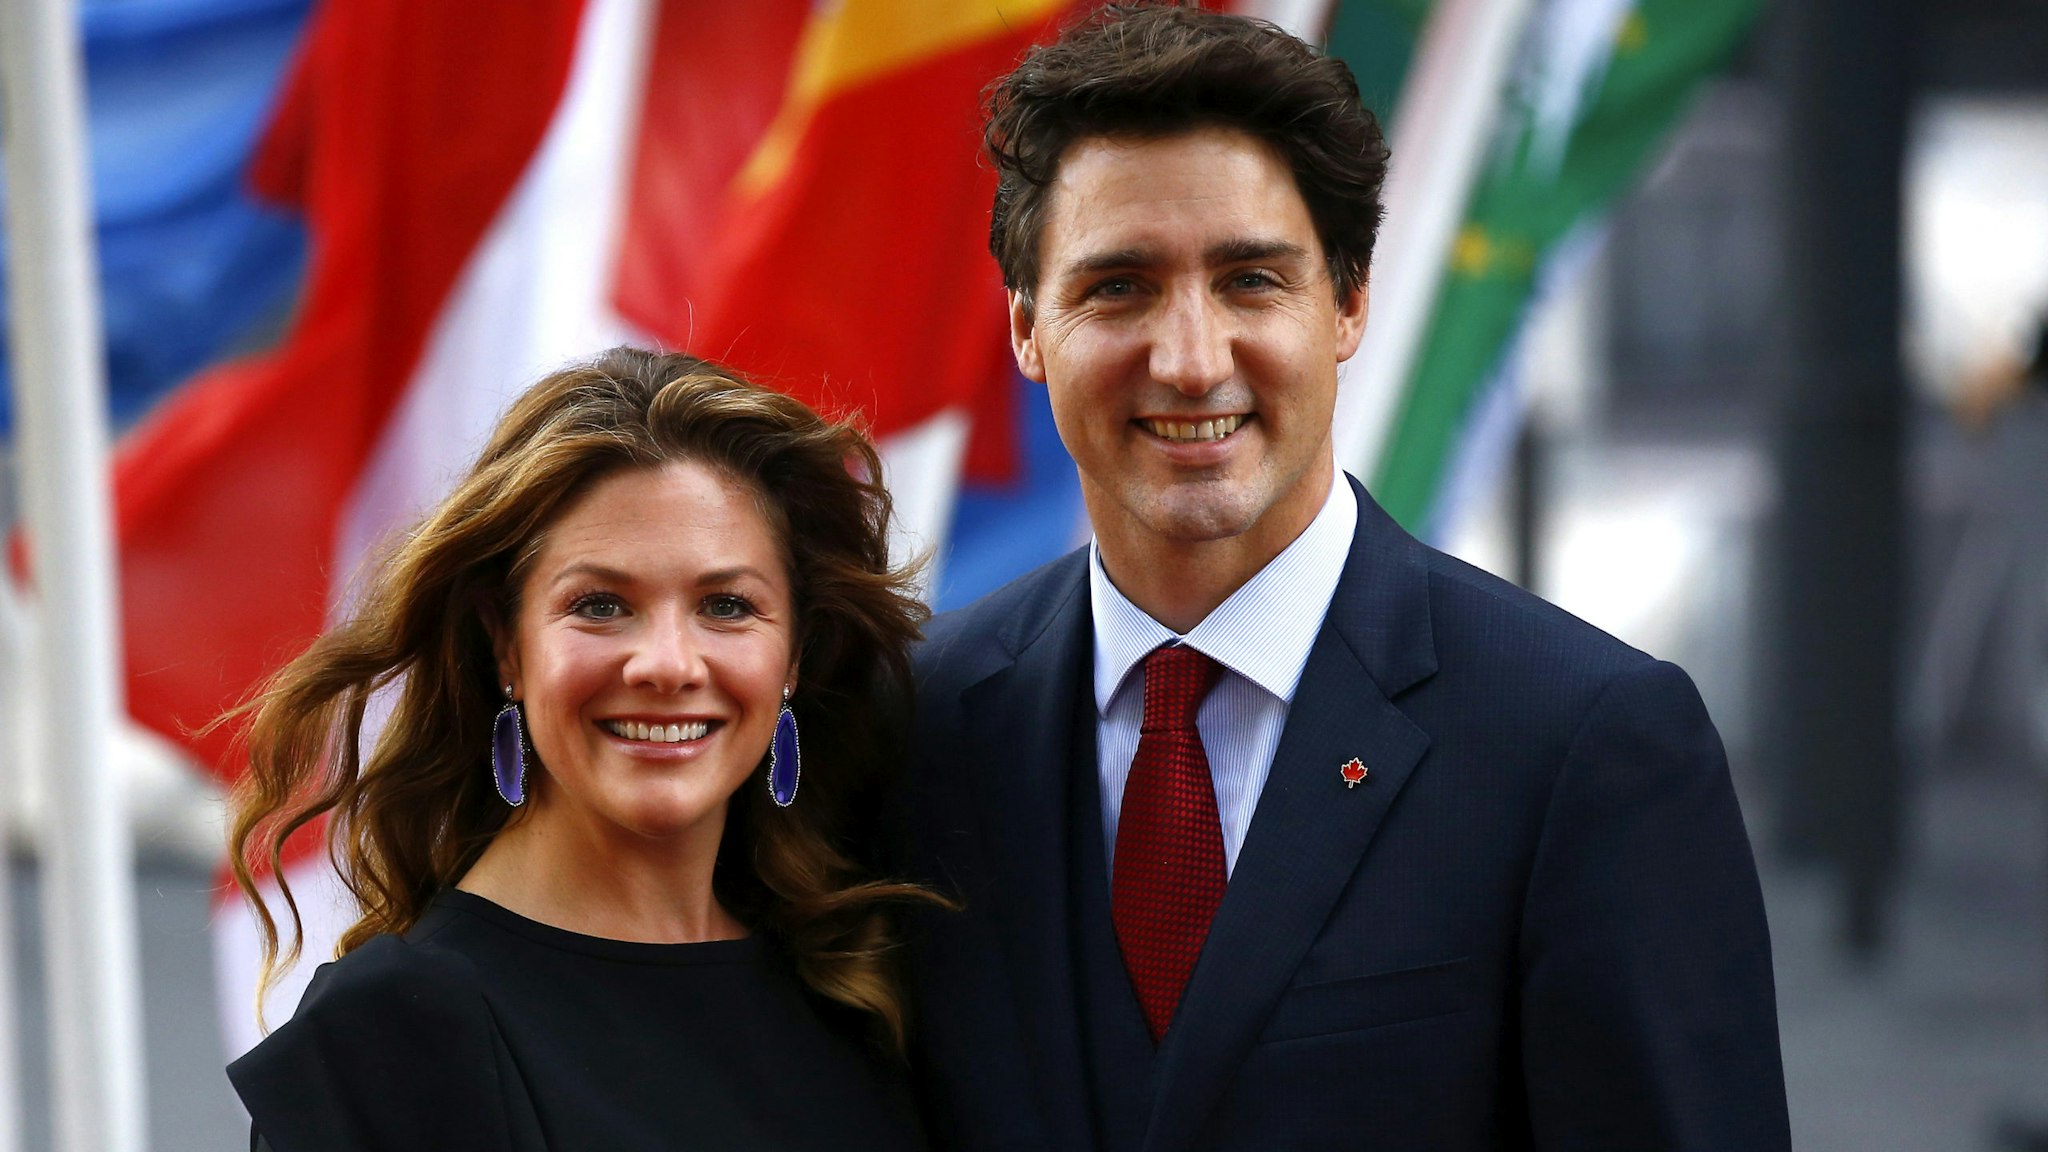 HAMBURG, GERMANY - JULY 07: Prime Minister of Canada Justin Trudeau with his wife Sophie Trudeau arrive to attend a concert at the Elbphilharmonie philharmonic concert hall on the first day of the G20 economic summit on July 7, 2017 in Hamburg, Germany. The G20 group of nations are meeting July 7-8 and major topics will include climate change and migration.